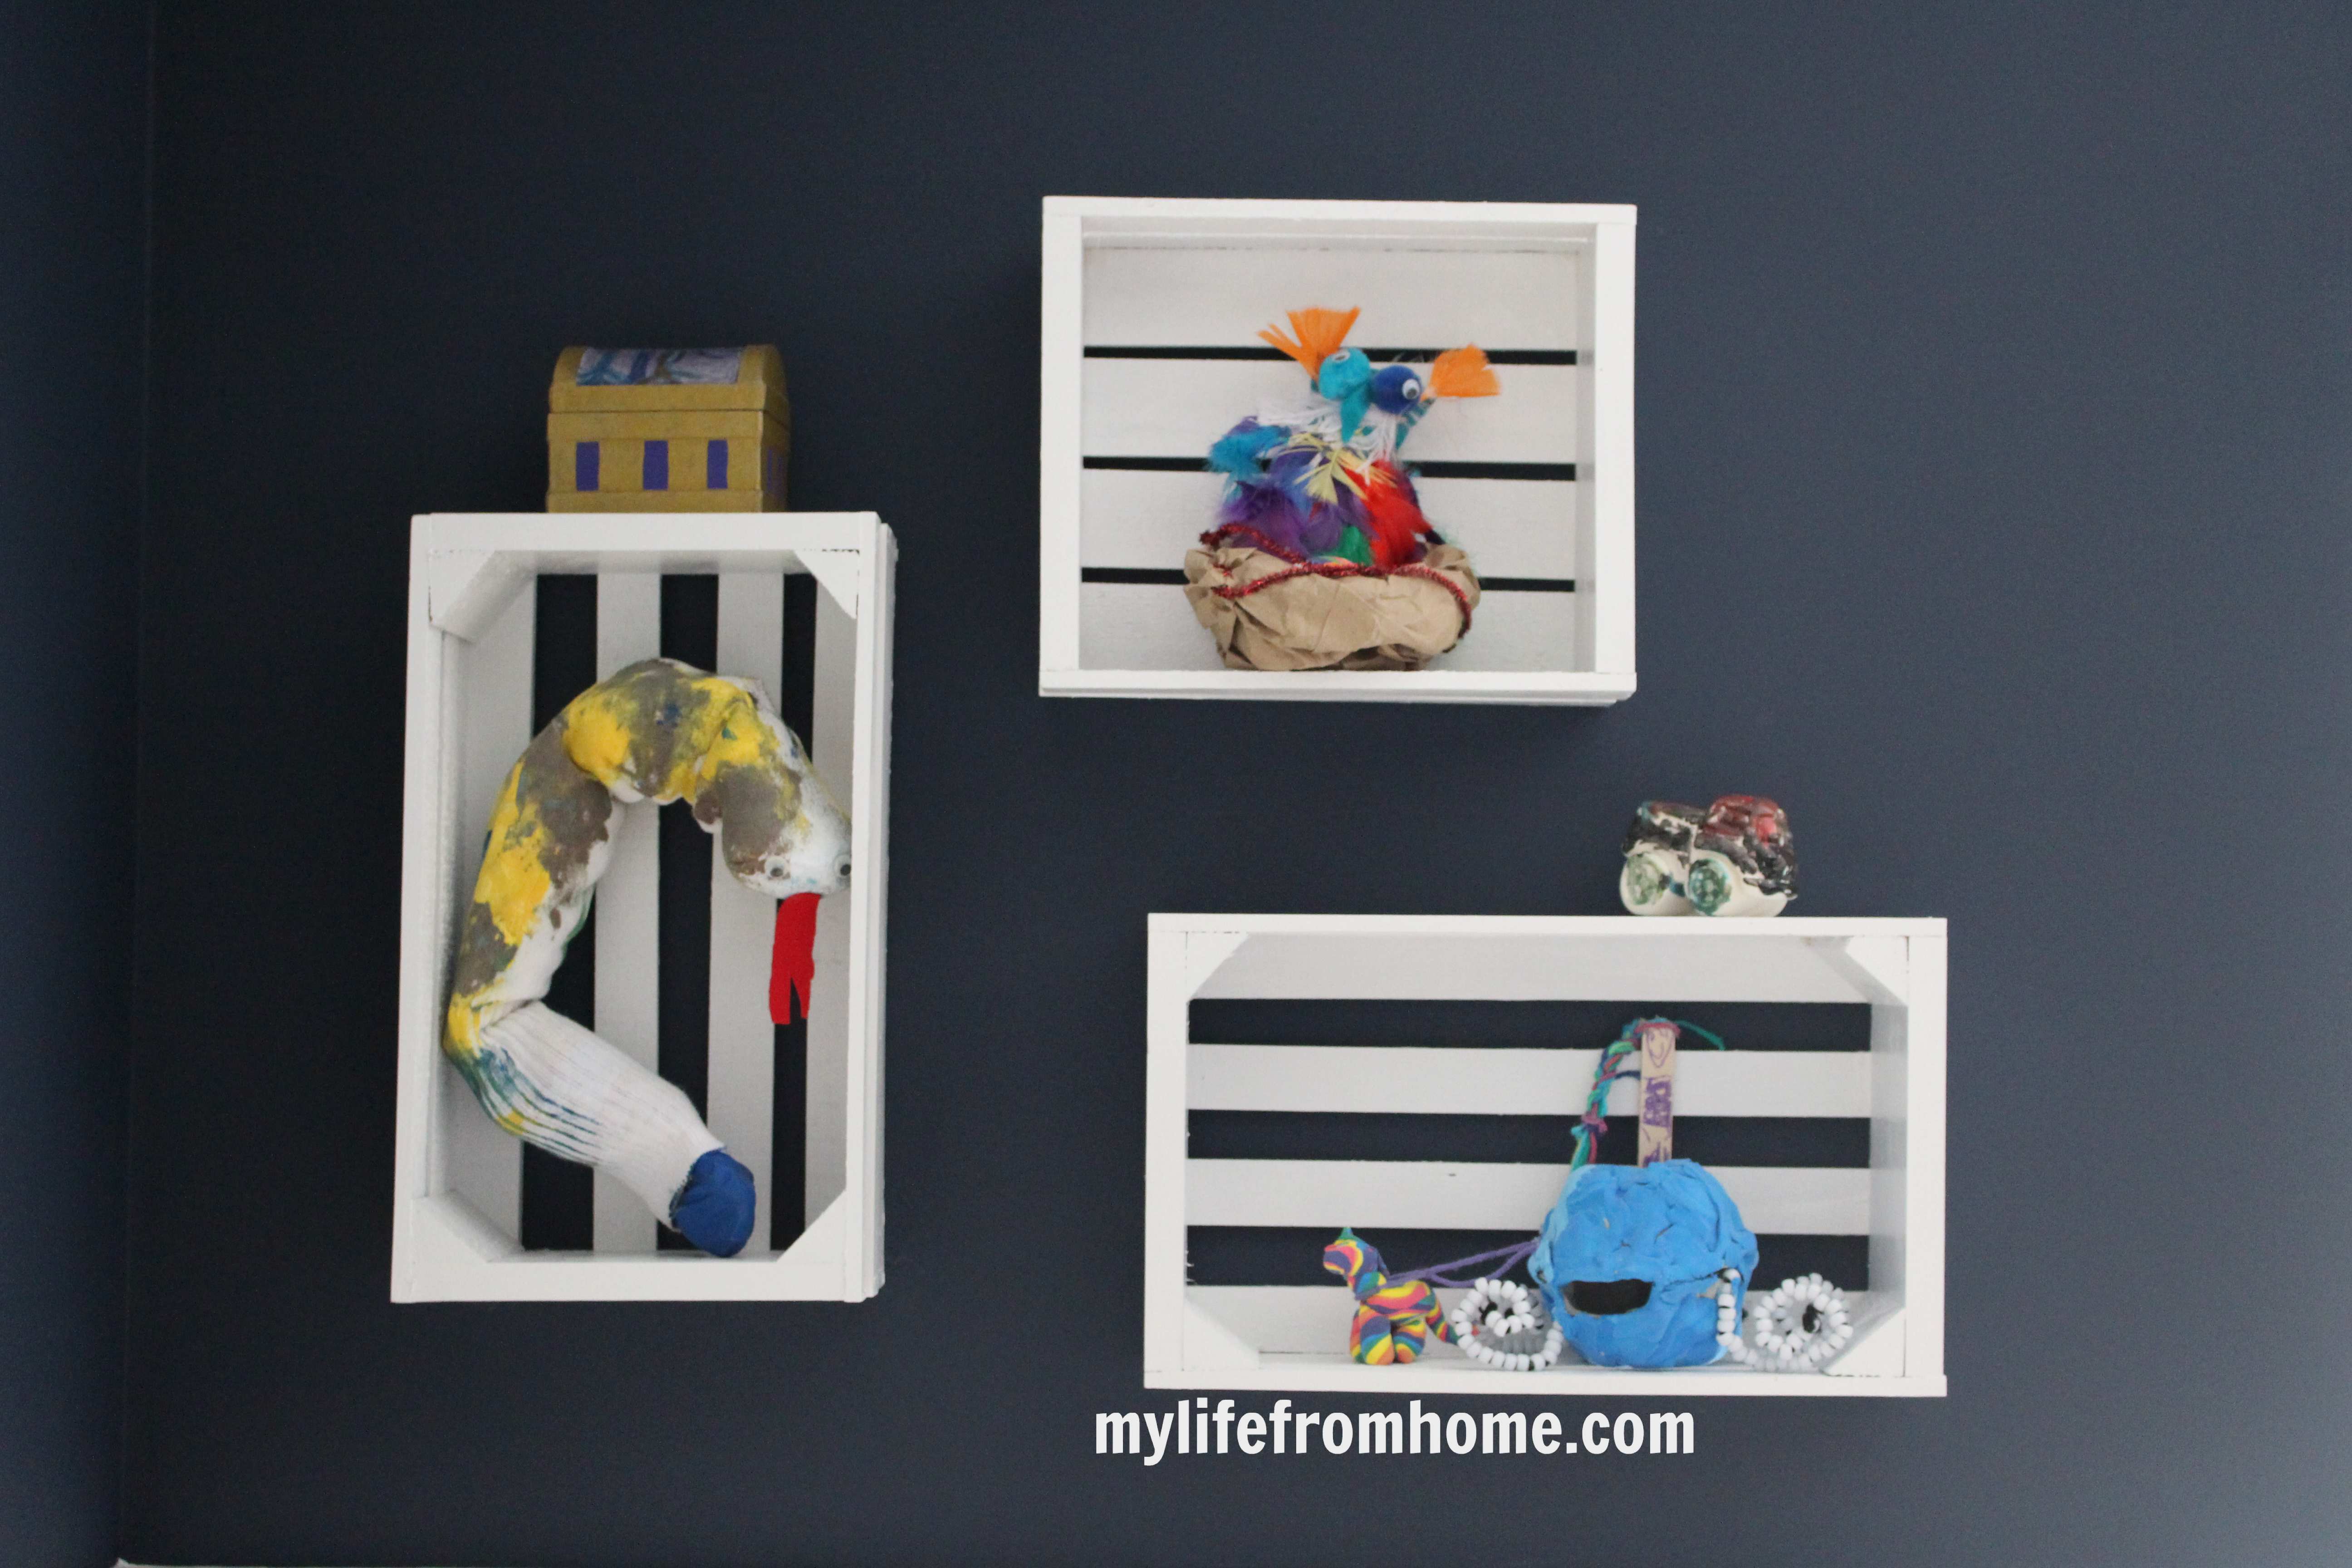 Hanging wall crates for displaying art by www.whitecottagehomeandliving.com